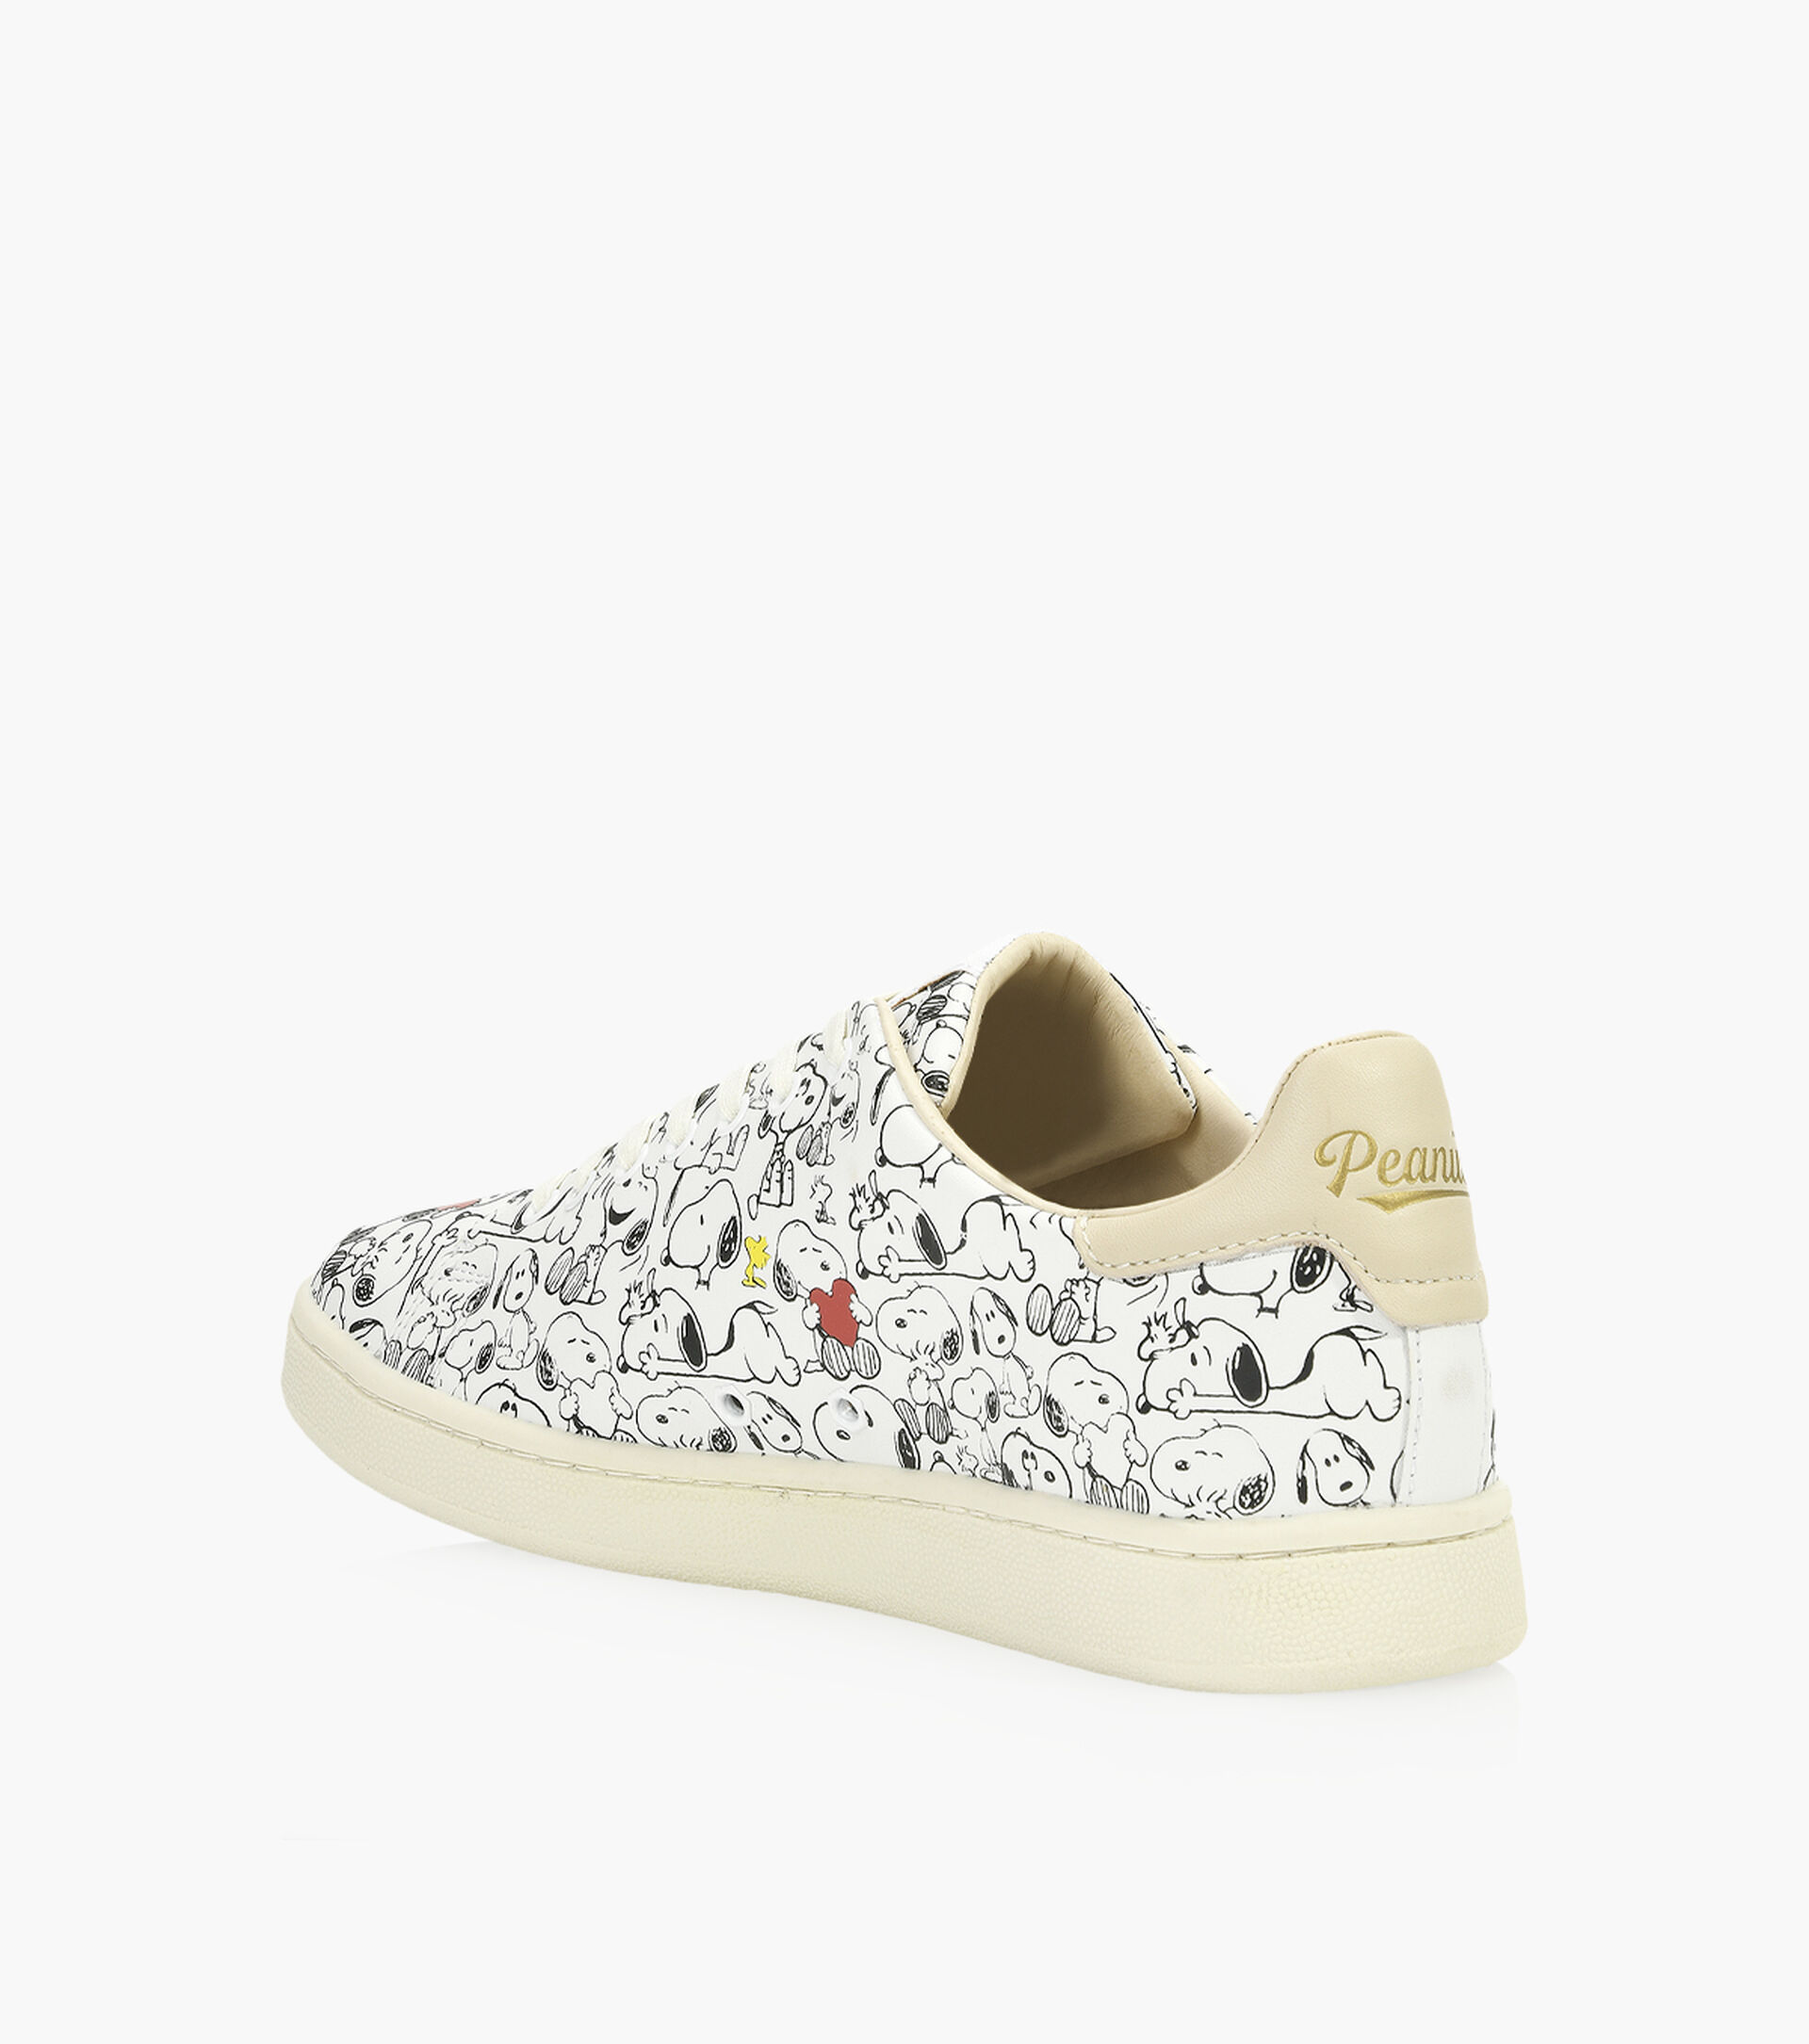 MASTER OF ARTS ALL OVER SNOOPY - White Leather | Browns Shoes